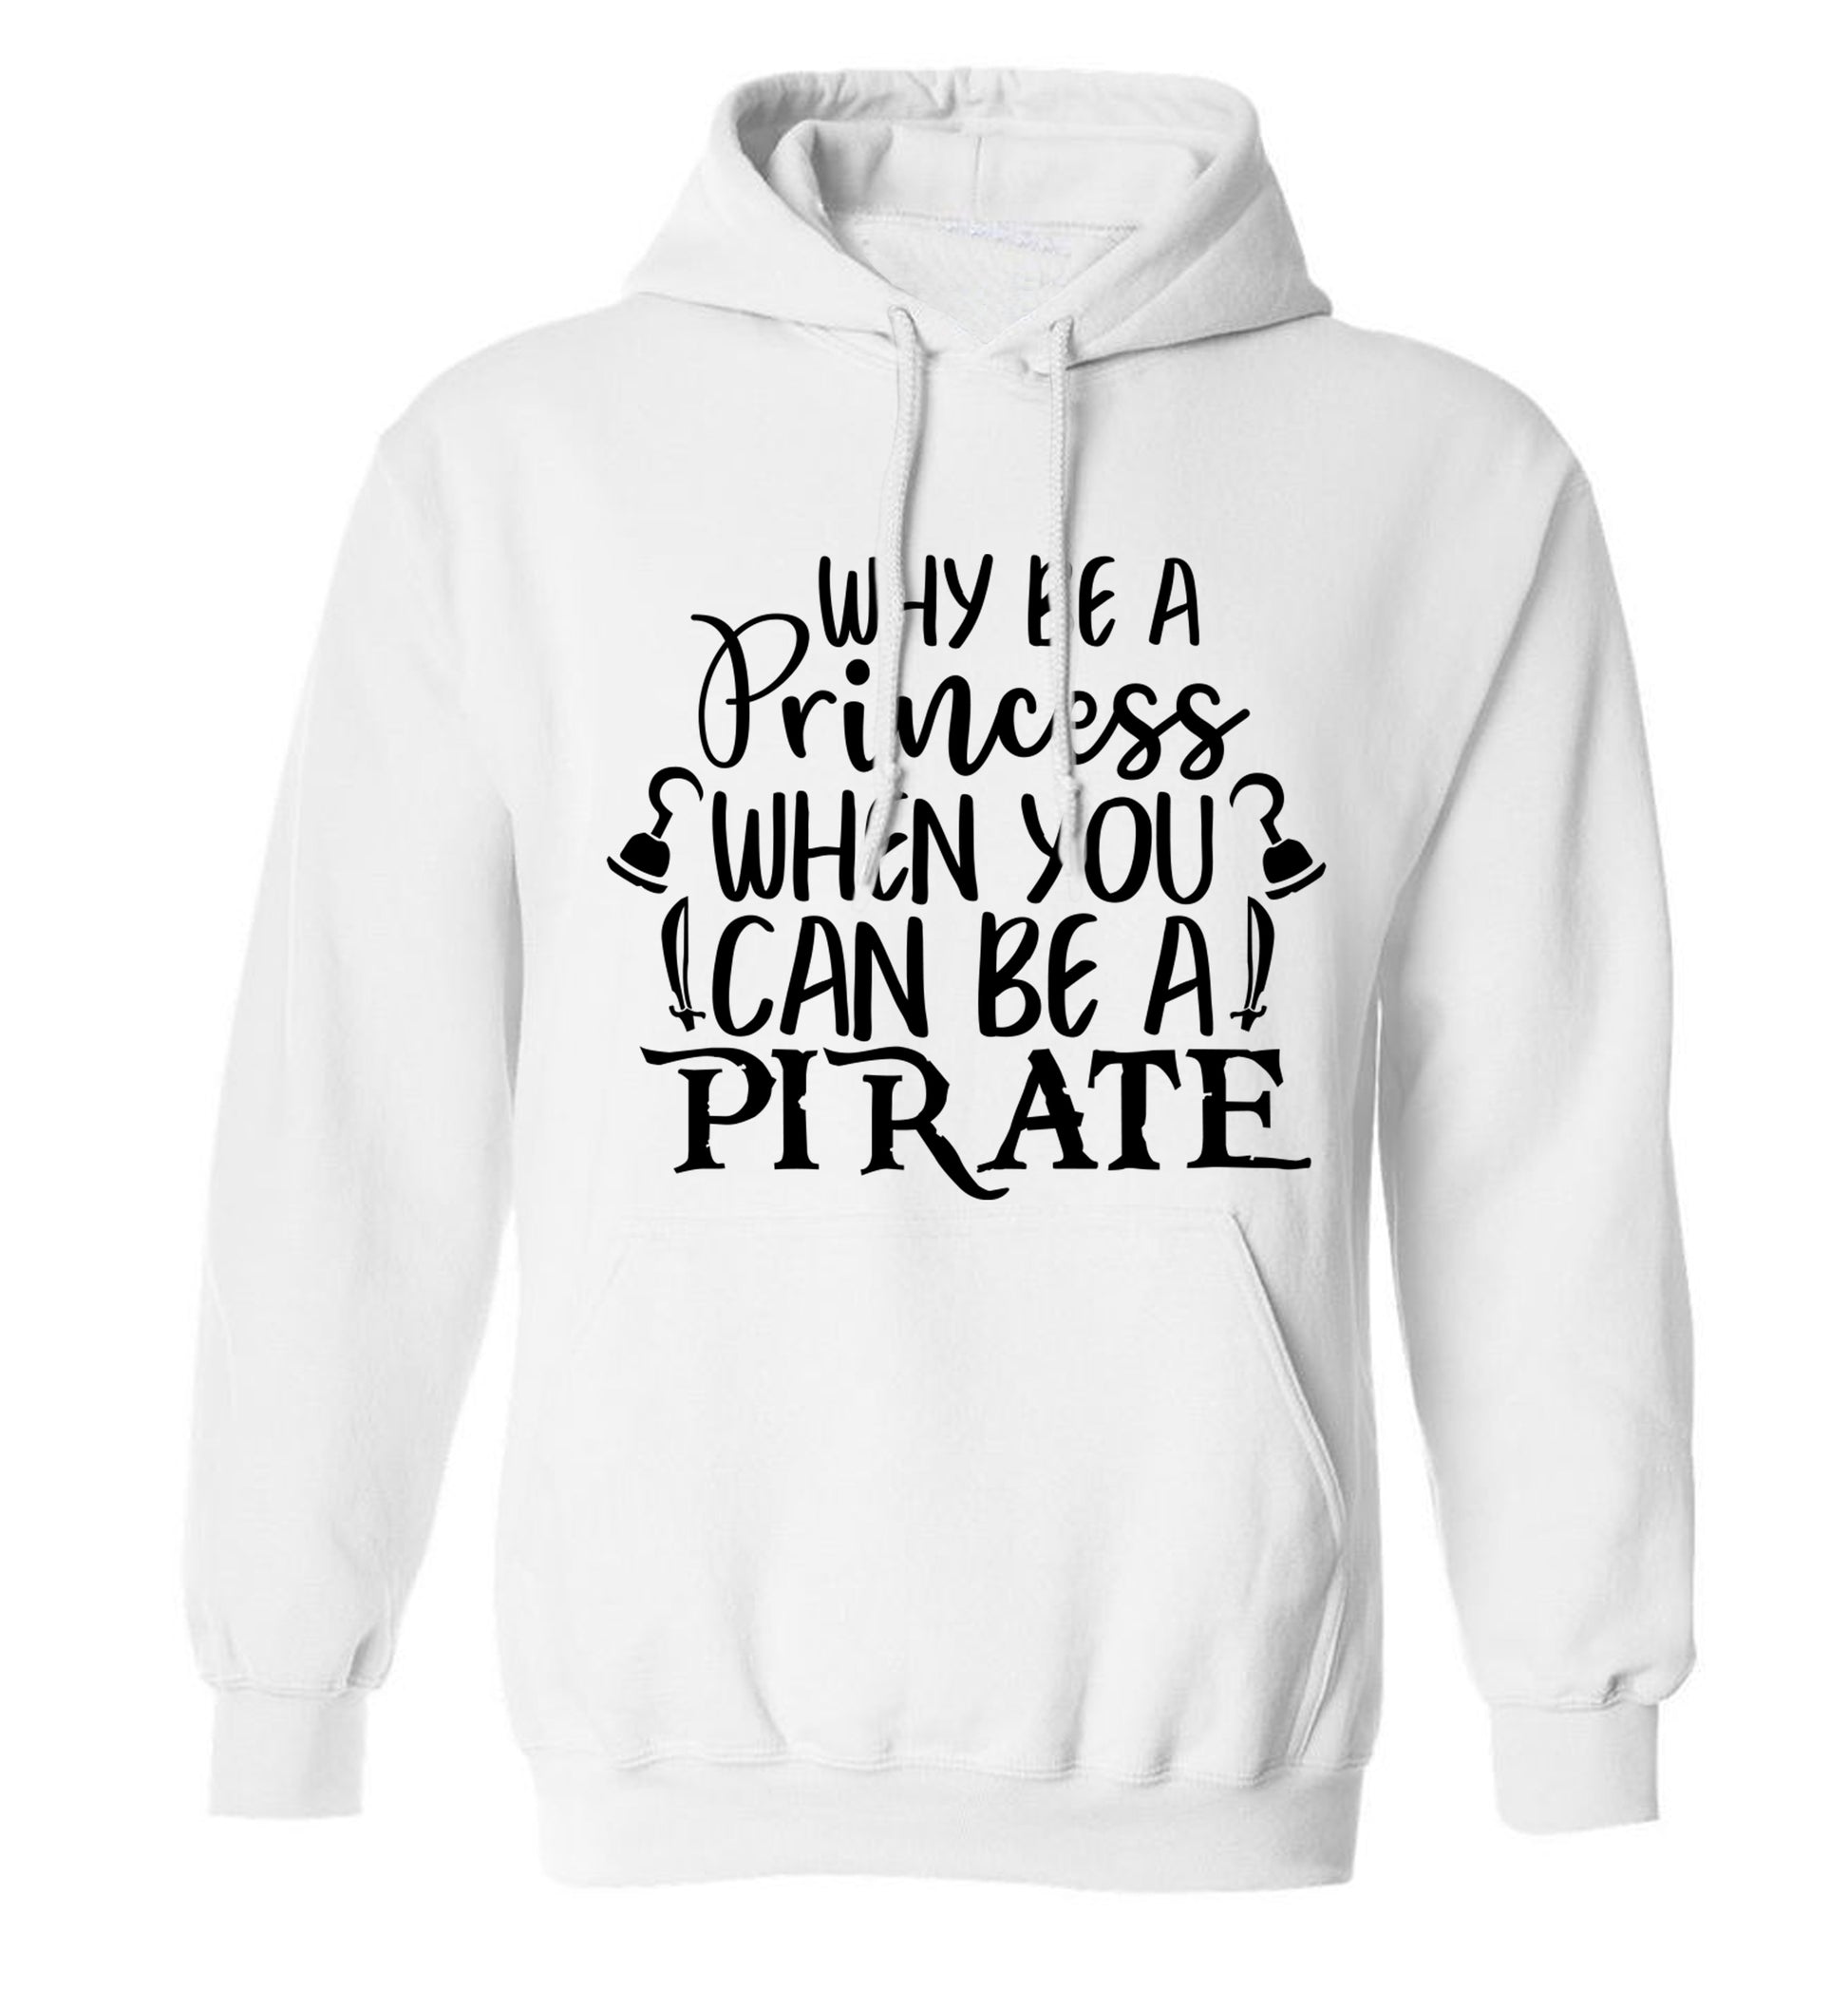 Why be a princess when you can be a pirate? adults unisex white hoodie 2XL